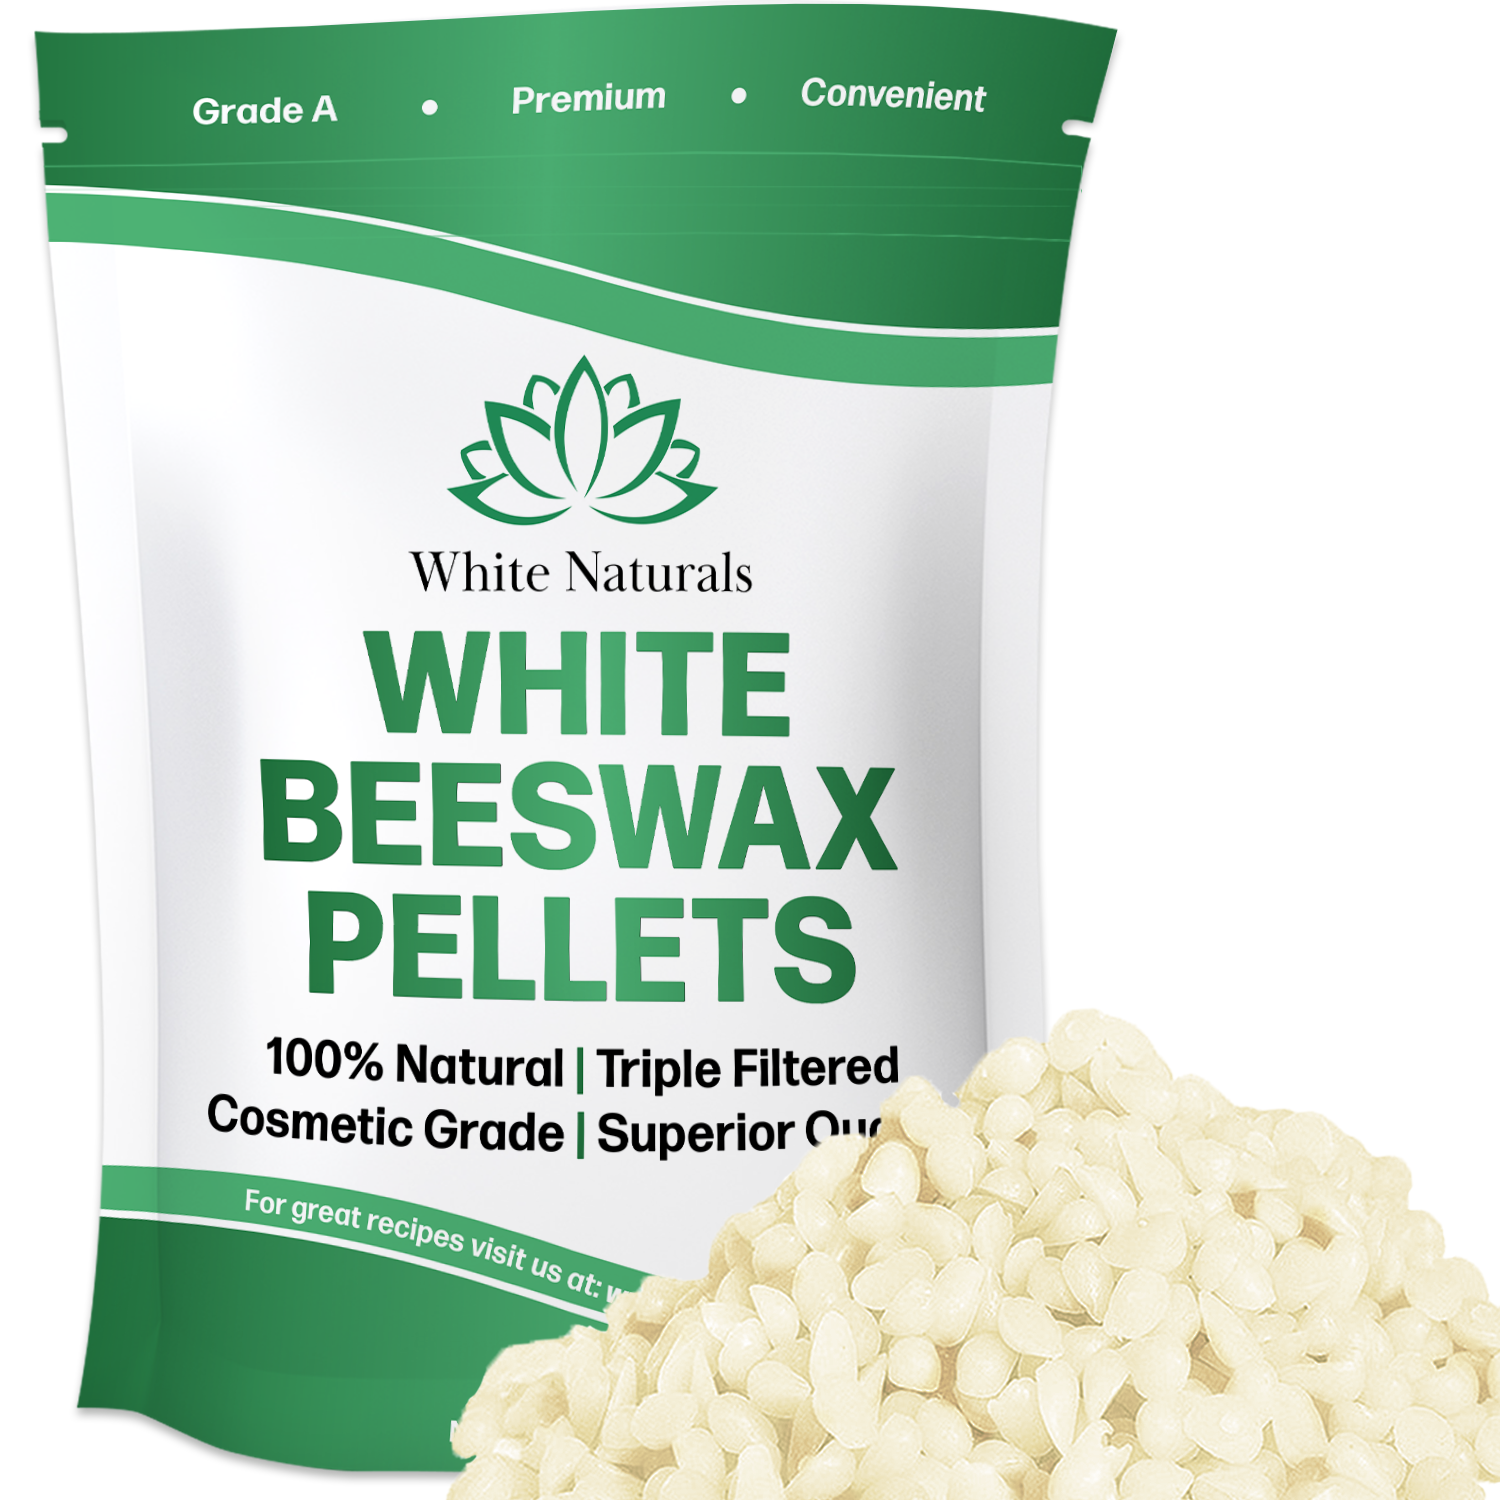 100g Granulated White Beeswax DIY Candle Making Materials Natural Wax For  Candle Making Handmade Wax Supplies For Cosmetics Candle Furniture